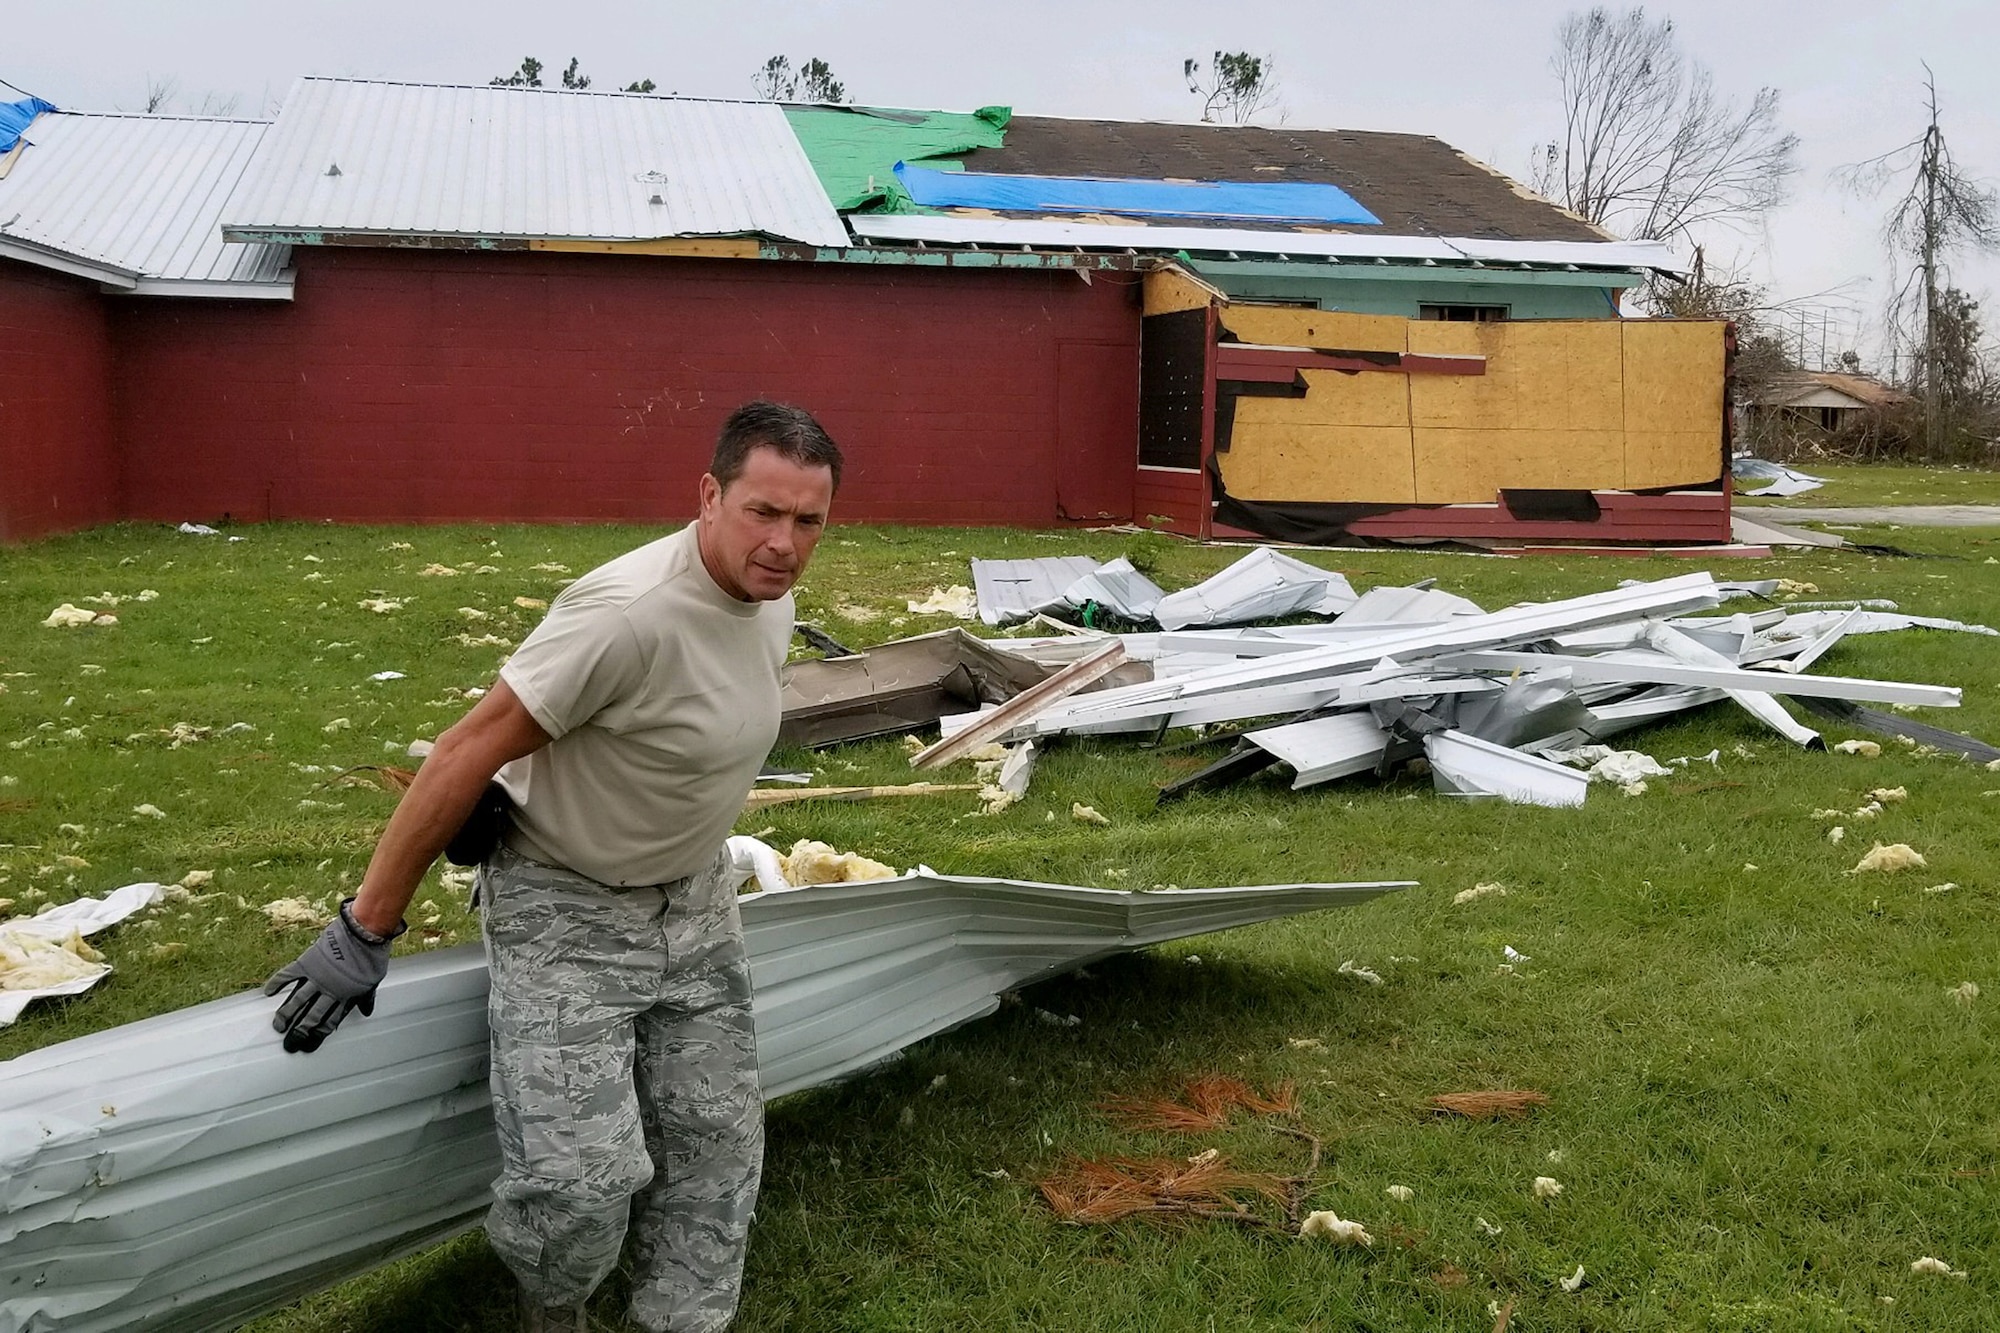 South Carolina Air National Guard helps Tyndall Air Force Base recover from Hurricane Michael